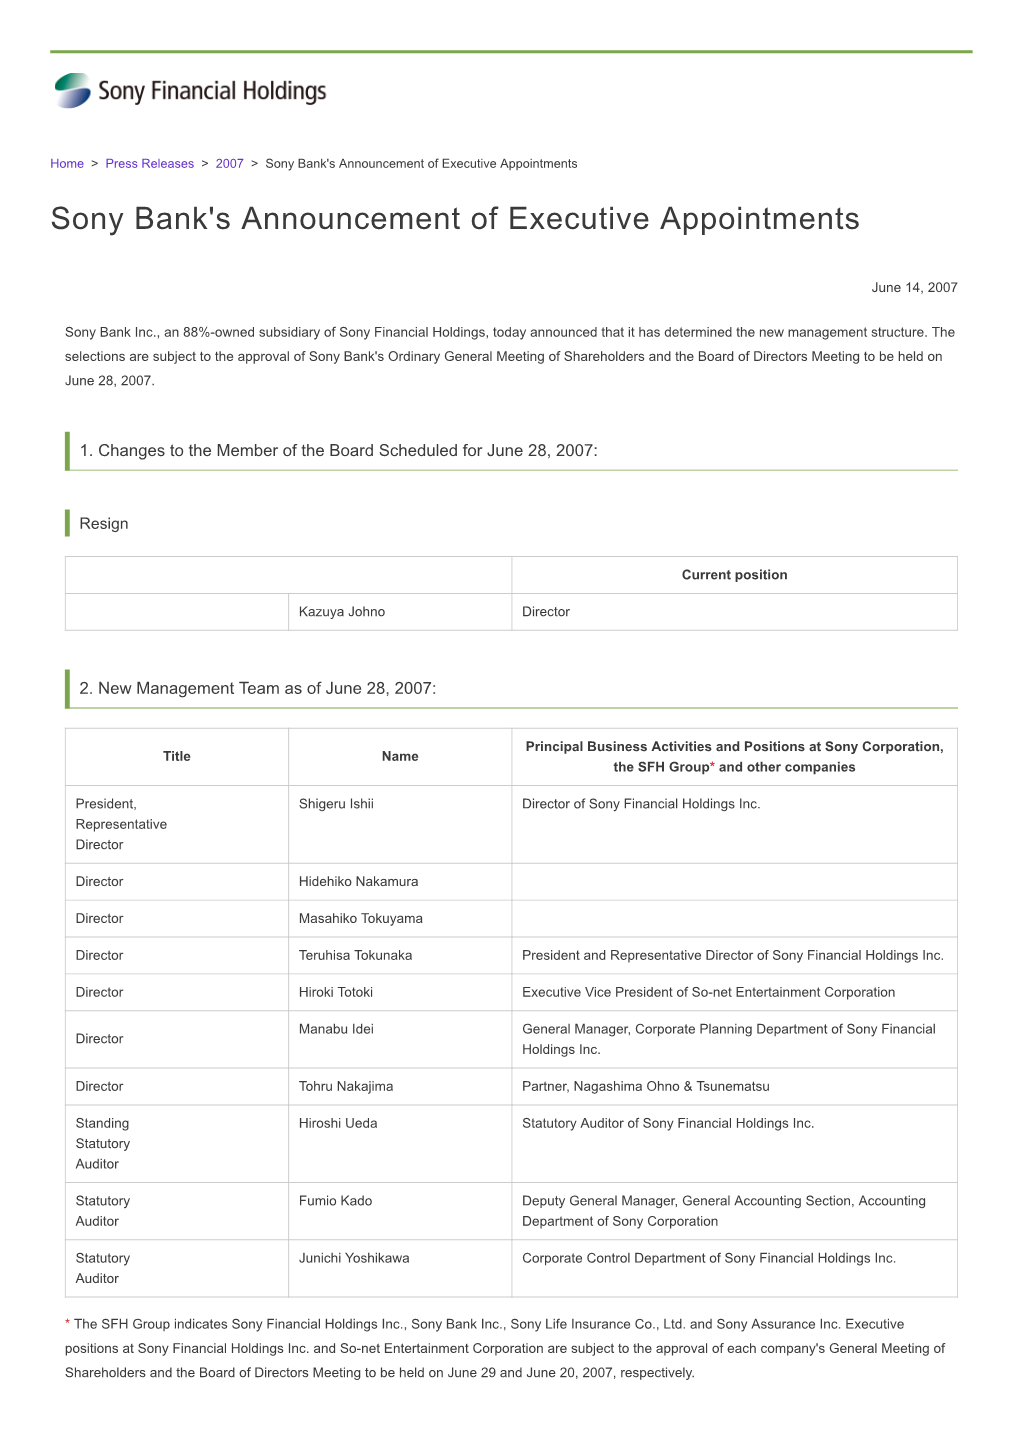 Sony Bank's Announcement of Executive Appointments